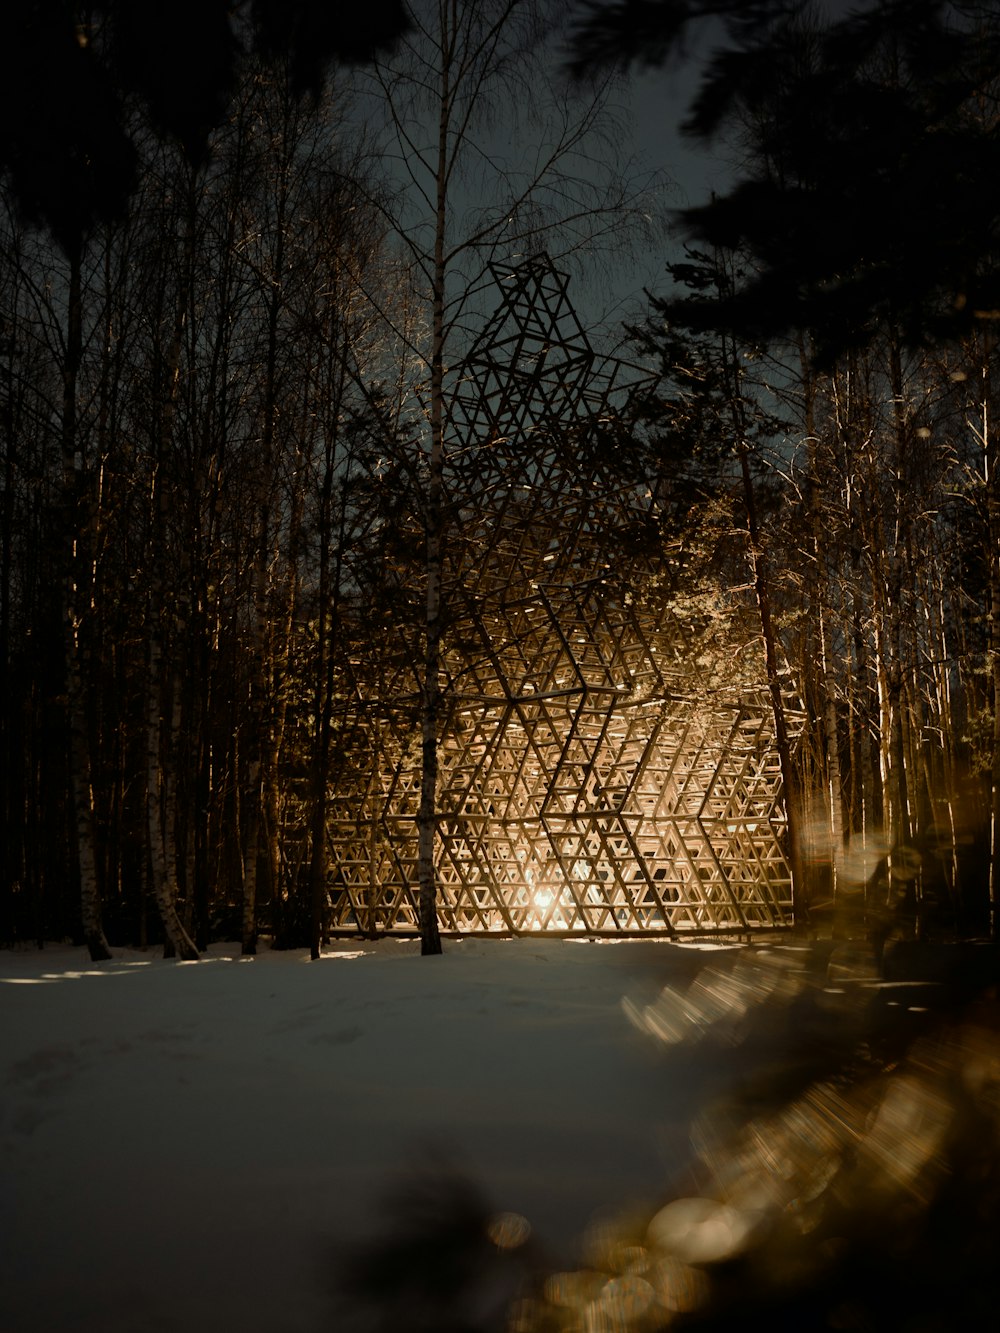 a wooden structure in the middle of a forest at night